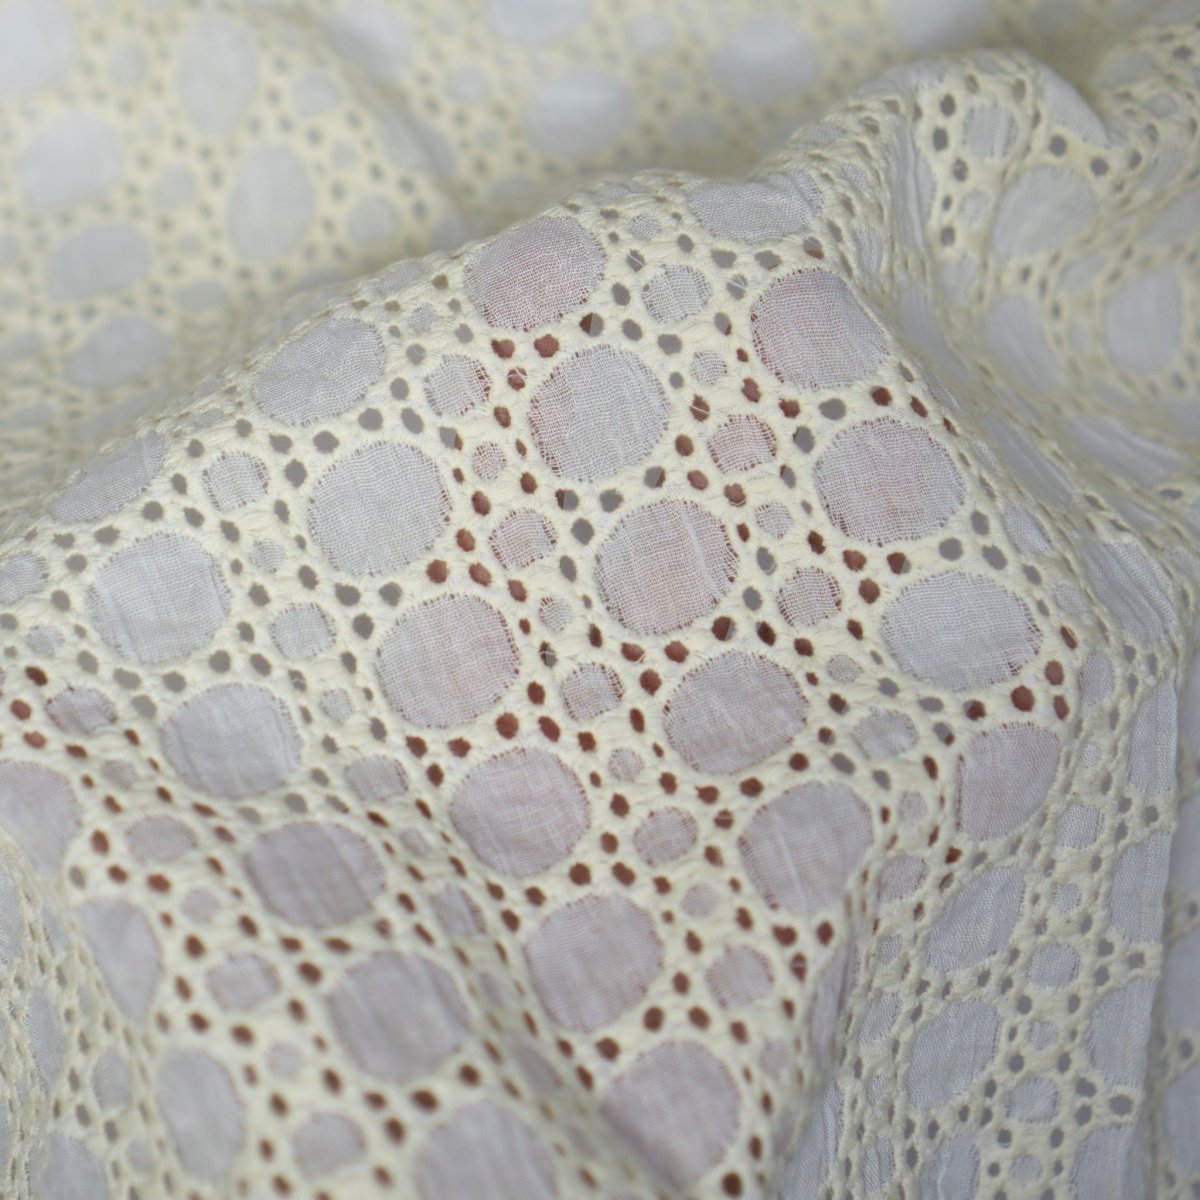 REMNANT - Embroidered Cotton - Cream Circles - 68% Cotton 32% Polyester - 62cm